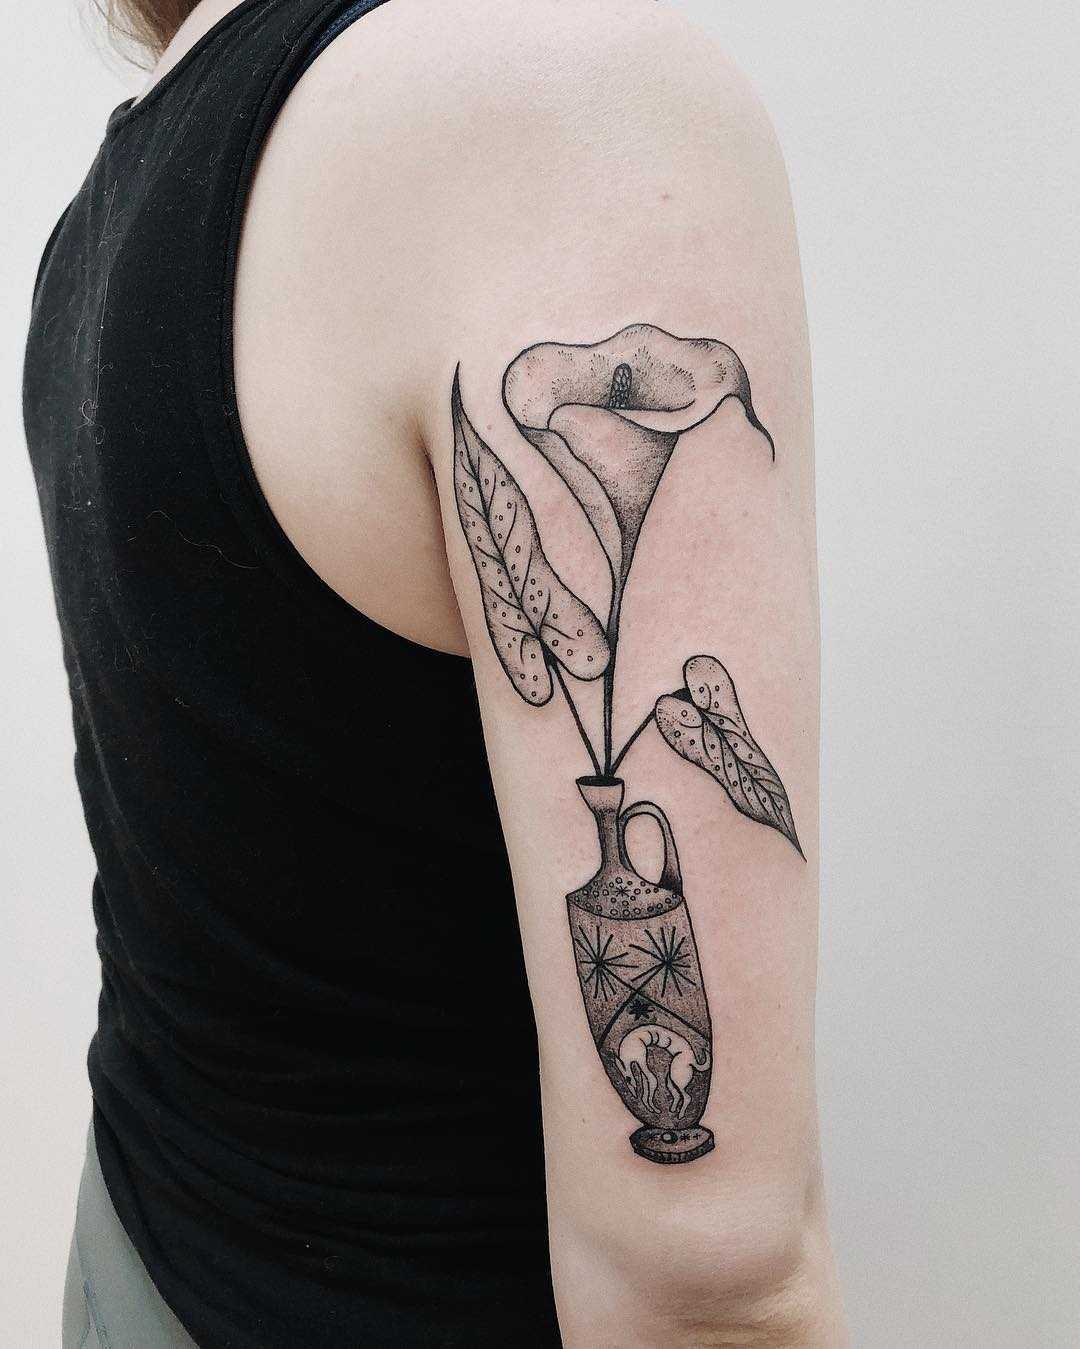 Vase with flowers tattoo on the arm